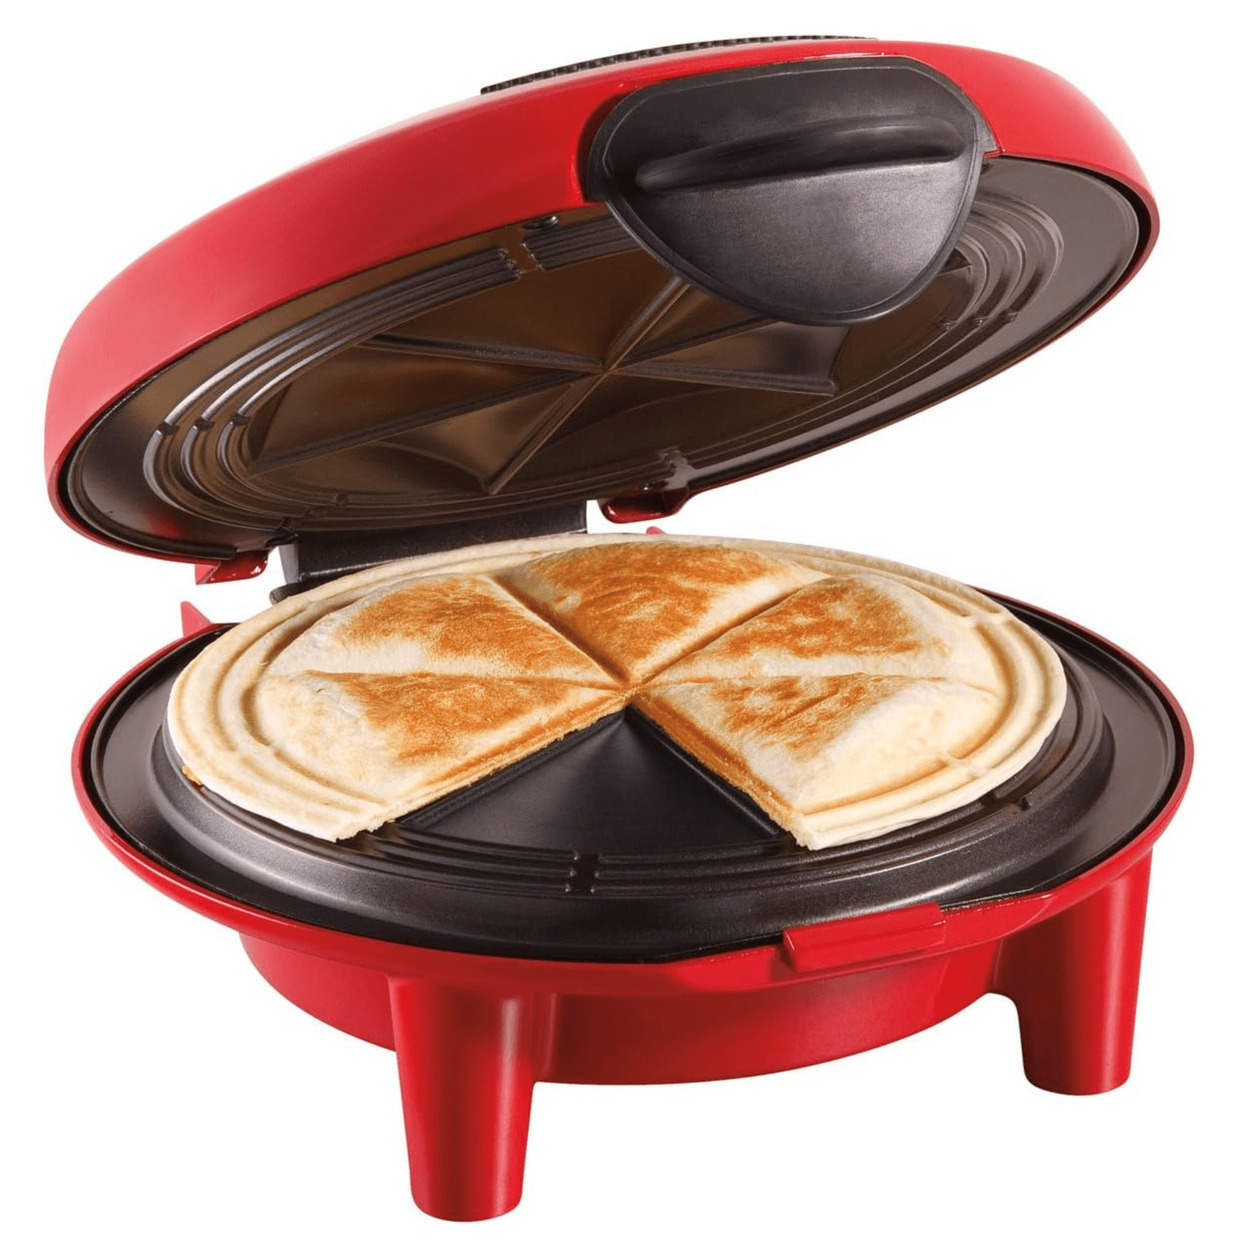 Hamilton Beach Quesadilla Maker, 8" Round, Makes 6 Wedges, Red, 25409 - image 1 of 3